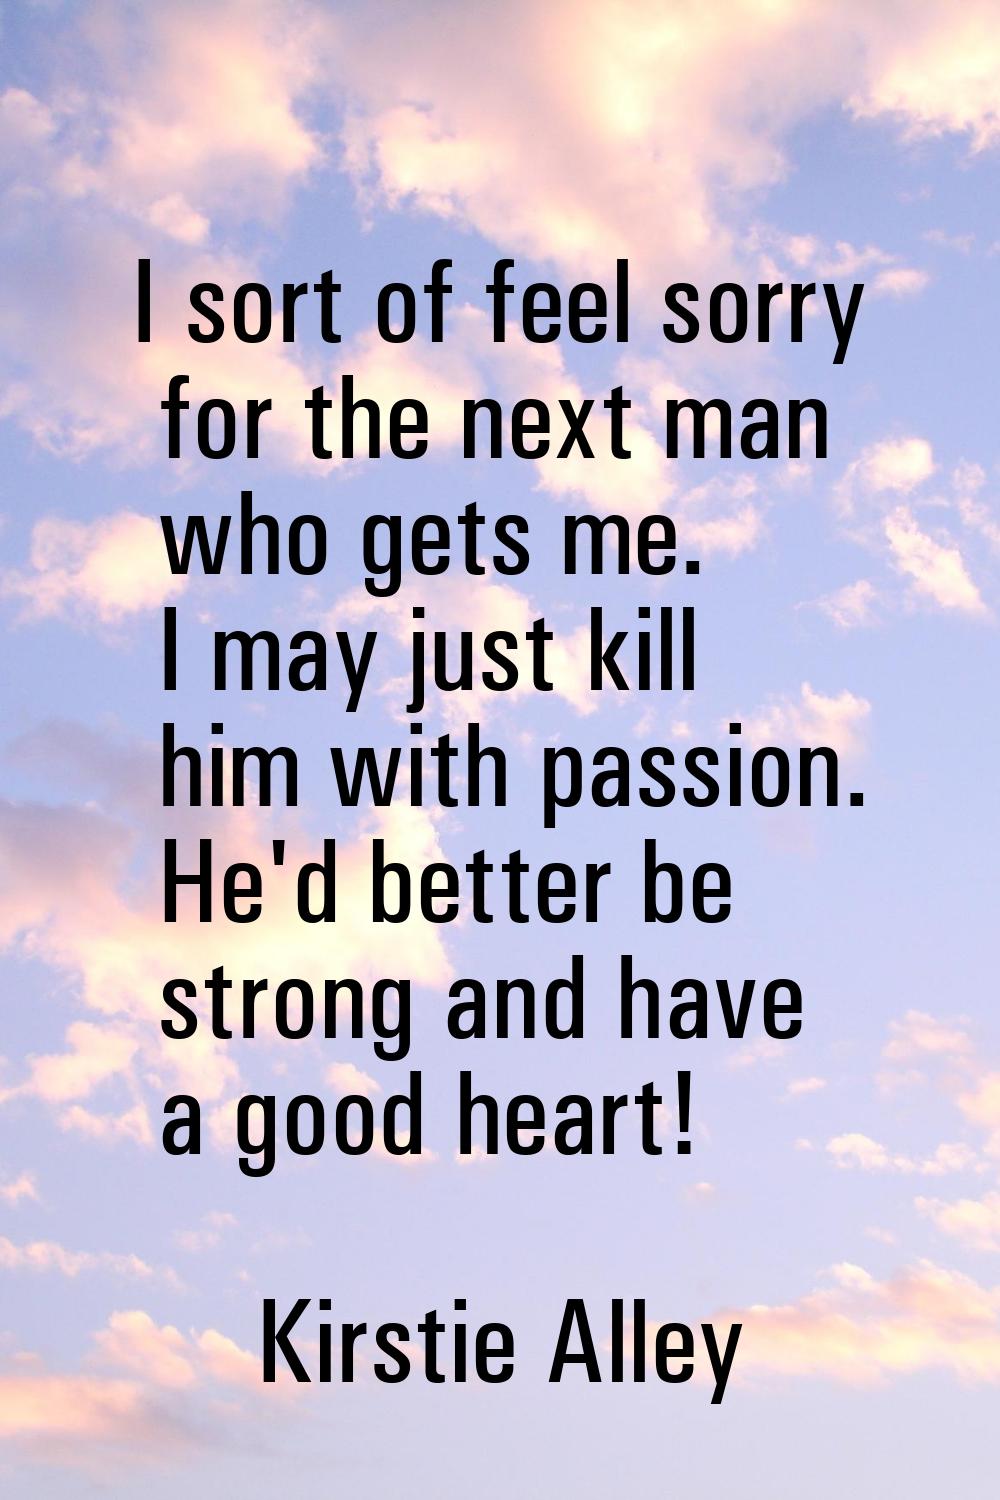 I sort of feel sorry for the next man who gets me. I may just kill him with passion. He'd better be